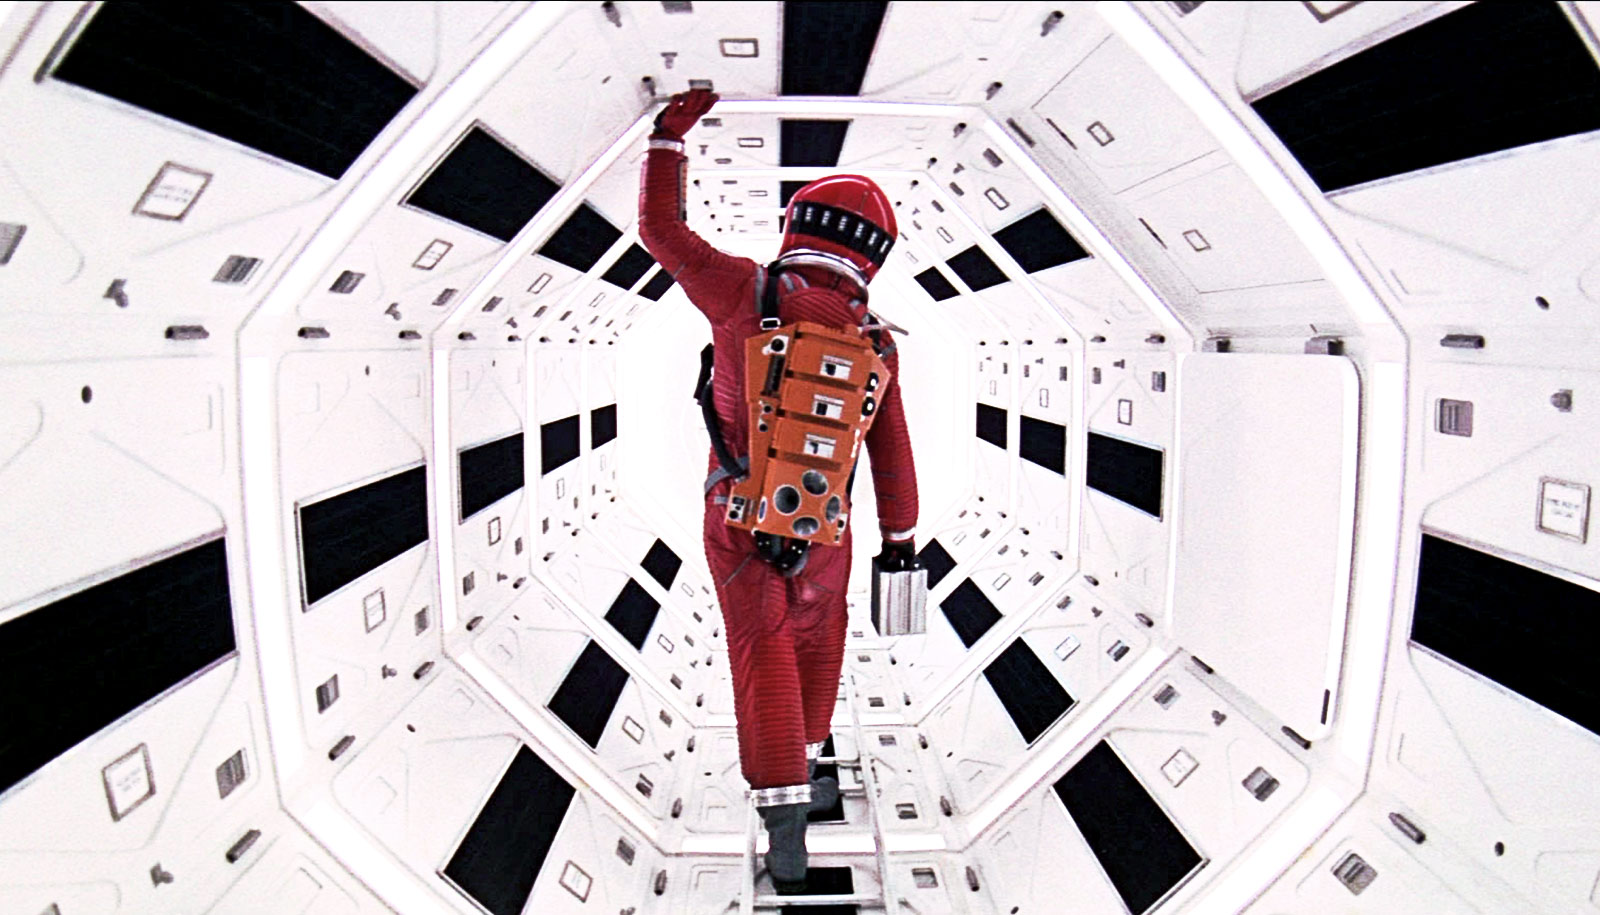 voyager criterion 2001 a space odyssey